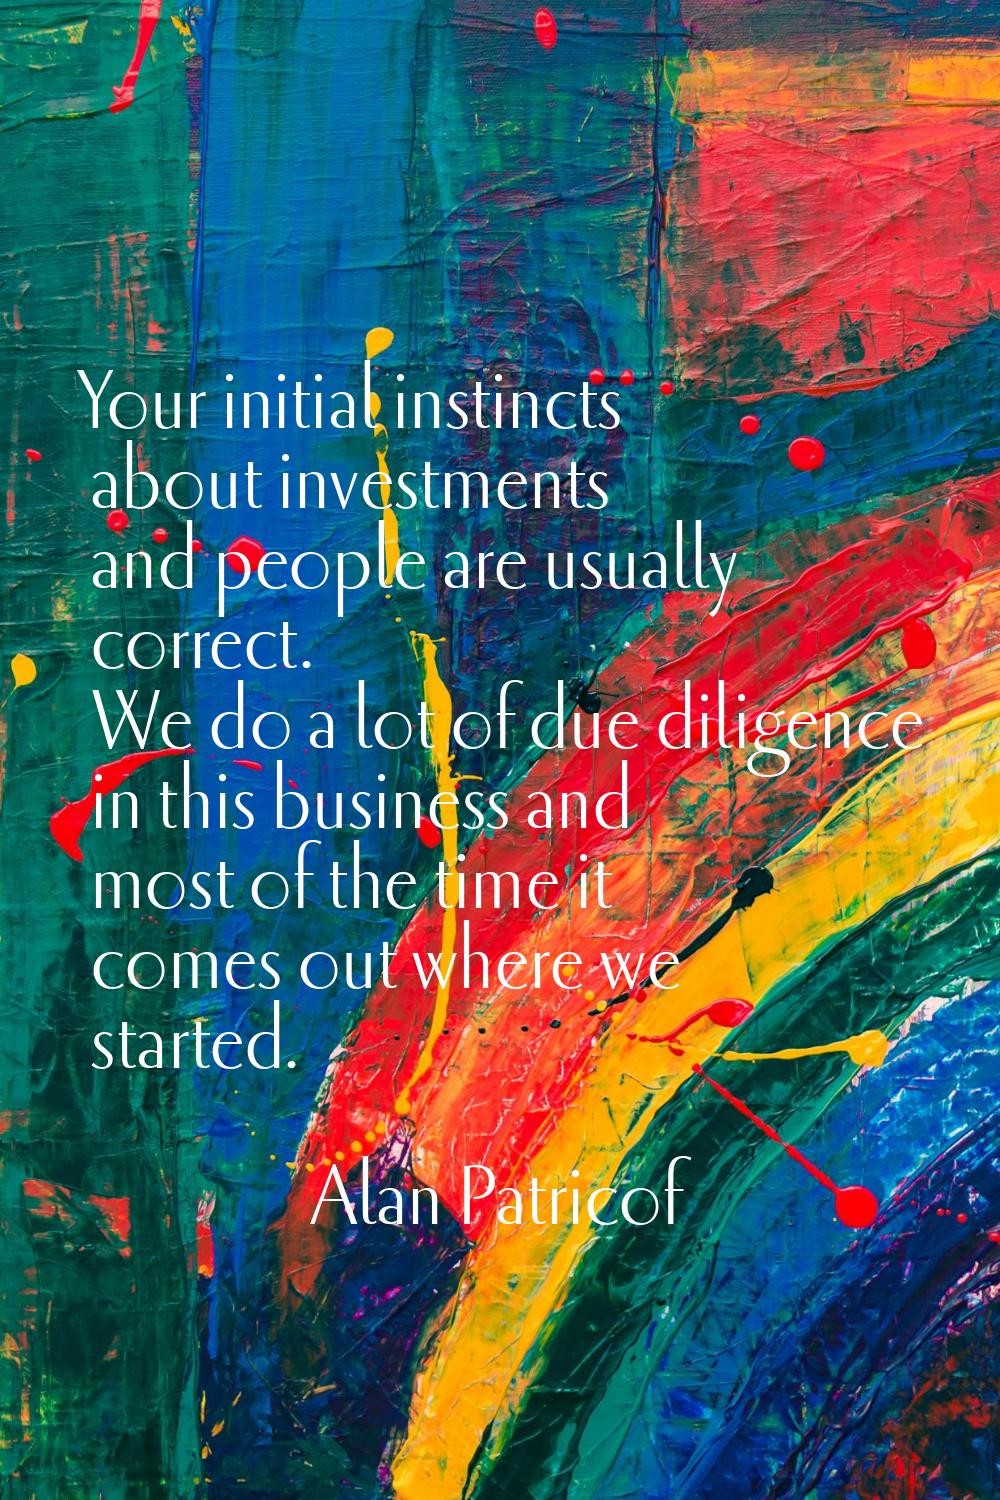 Your initial instincts about investments and people are usually correct. We do a lot of due diligen